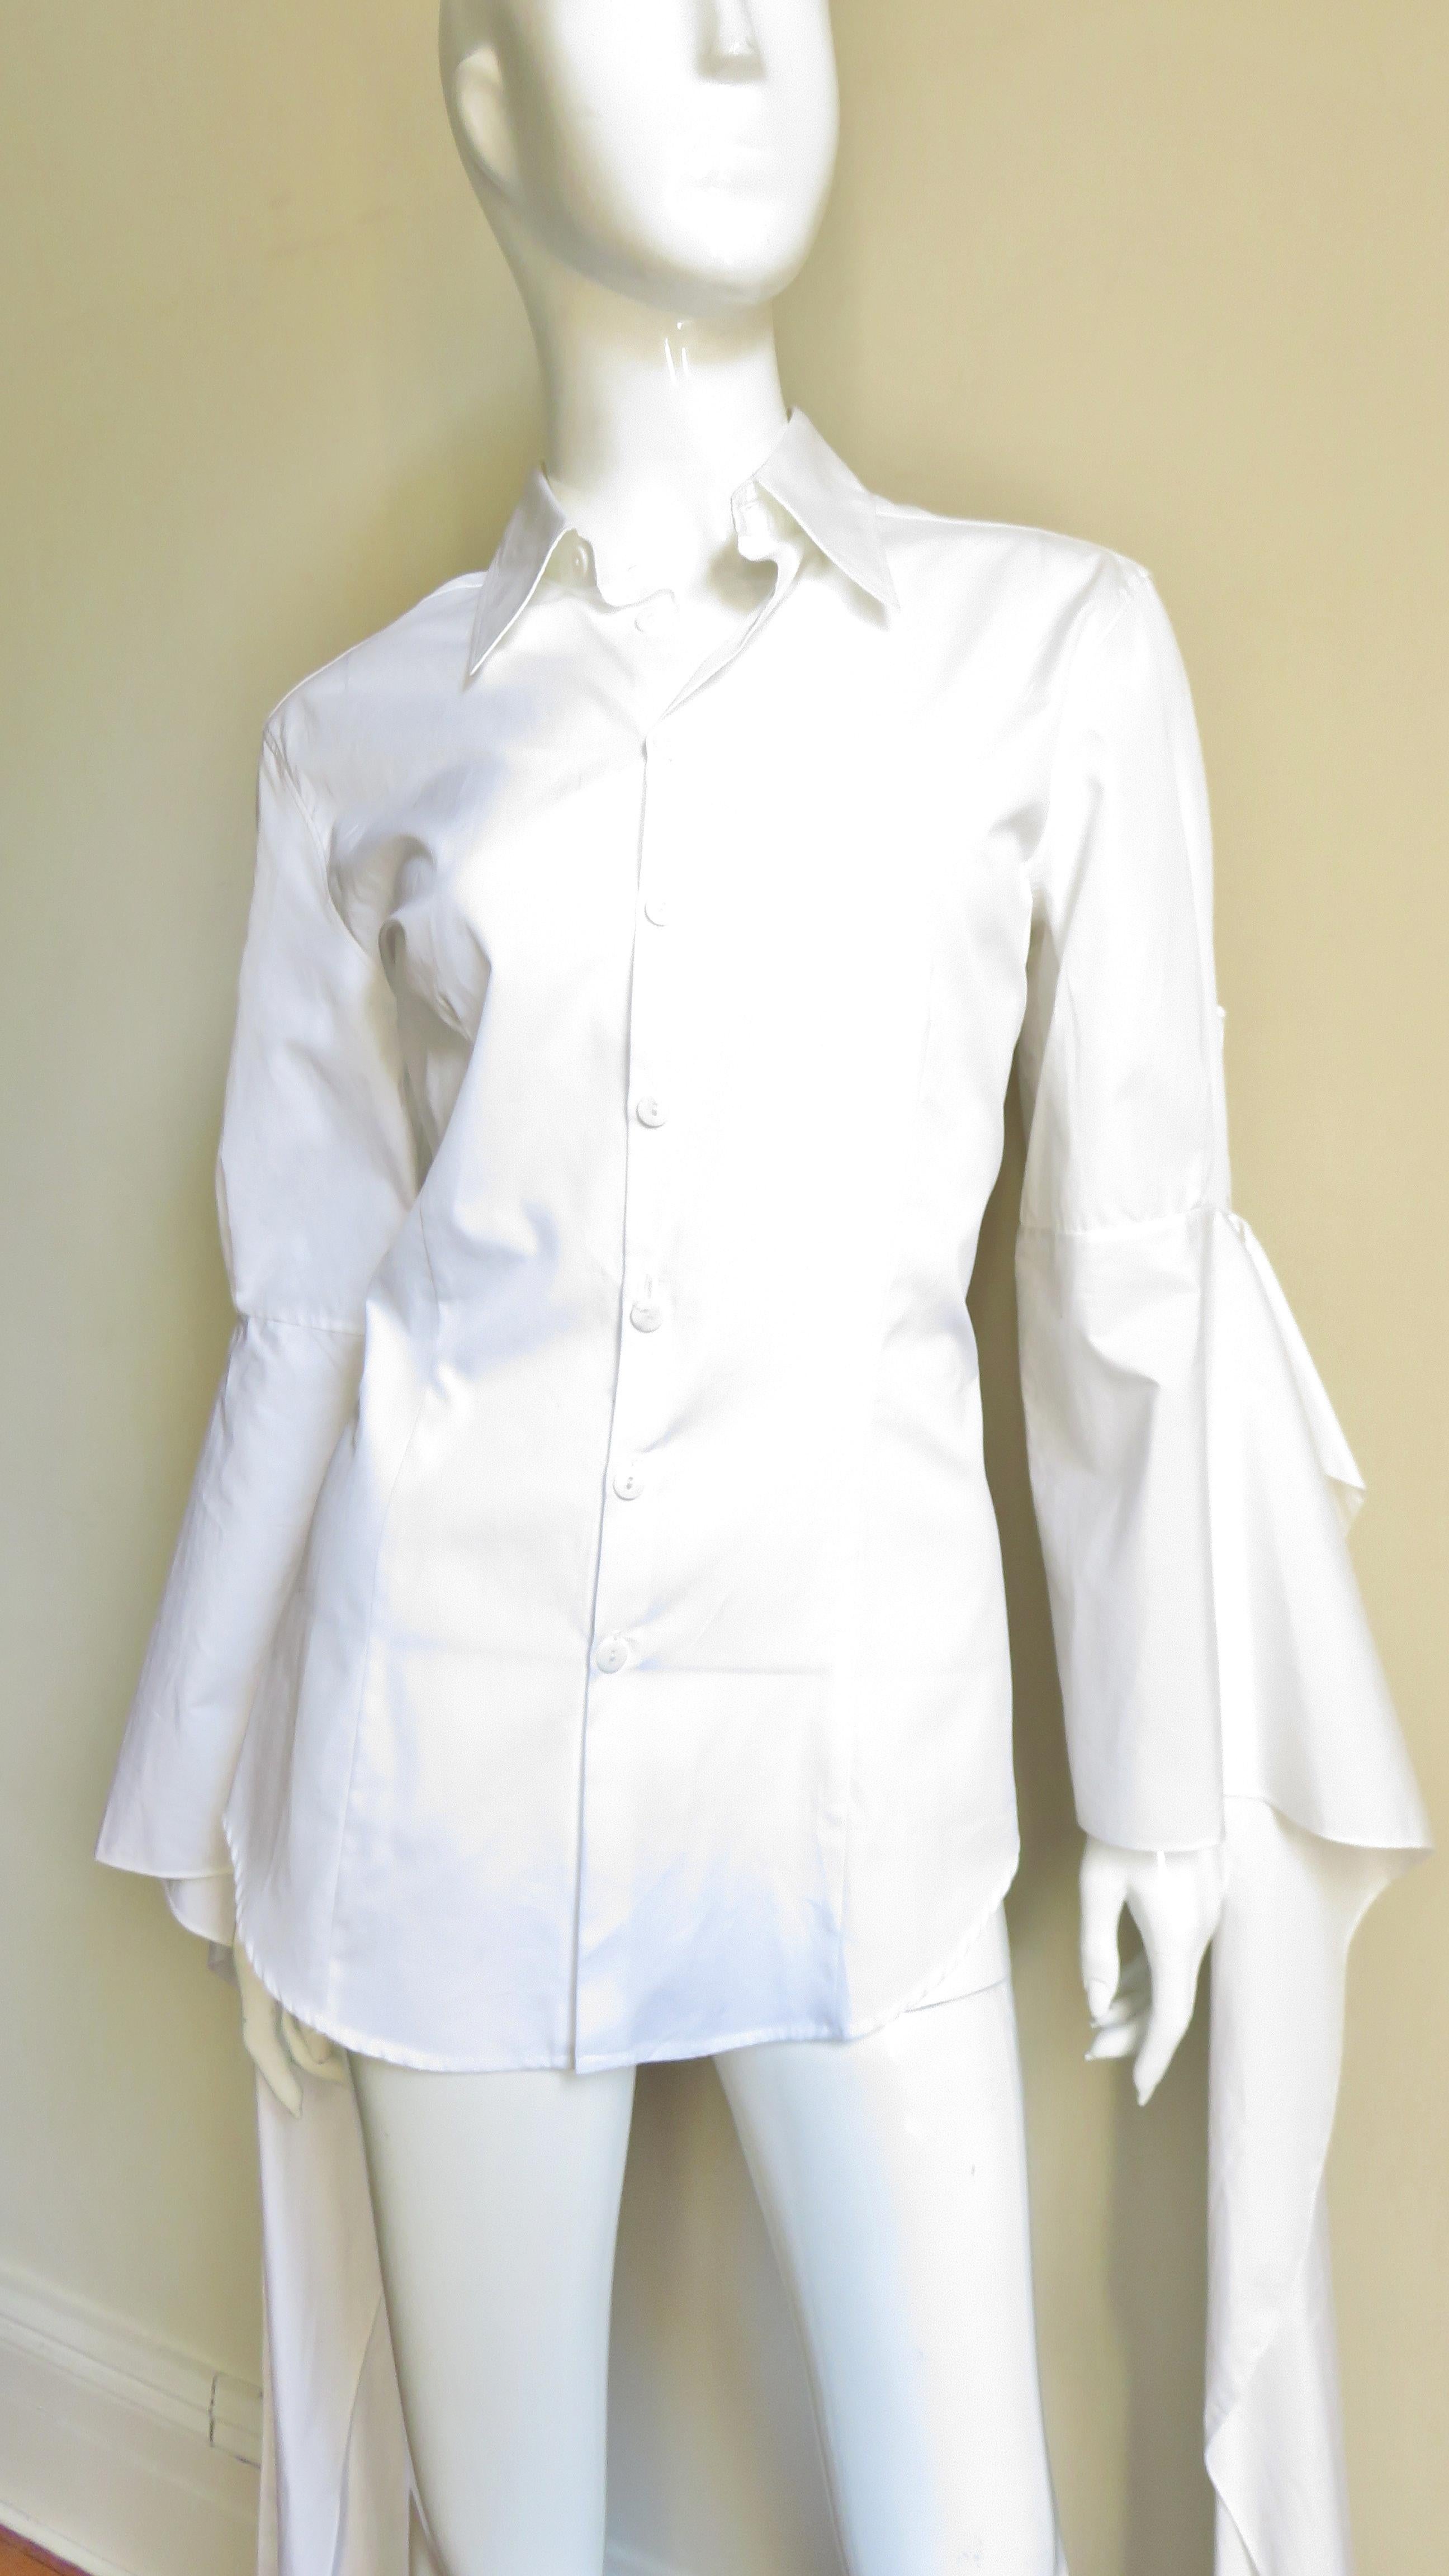 Jean Paul Gaultier New Shirt with Drape Sleeves In Excellent Condition For Sale In Water Mill, NY